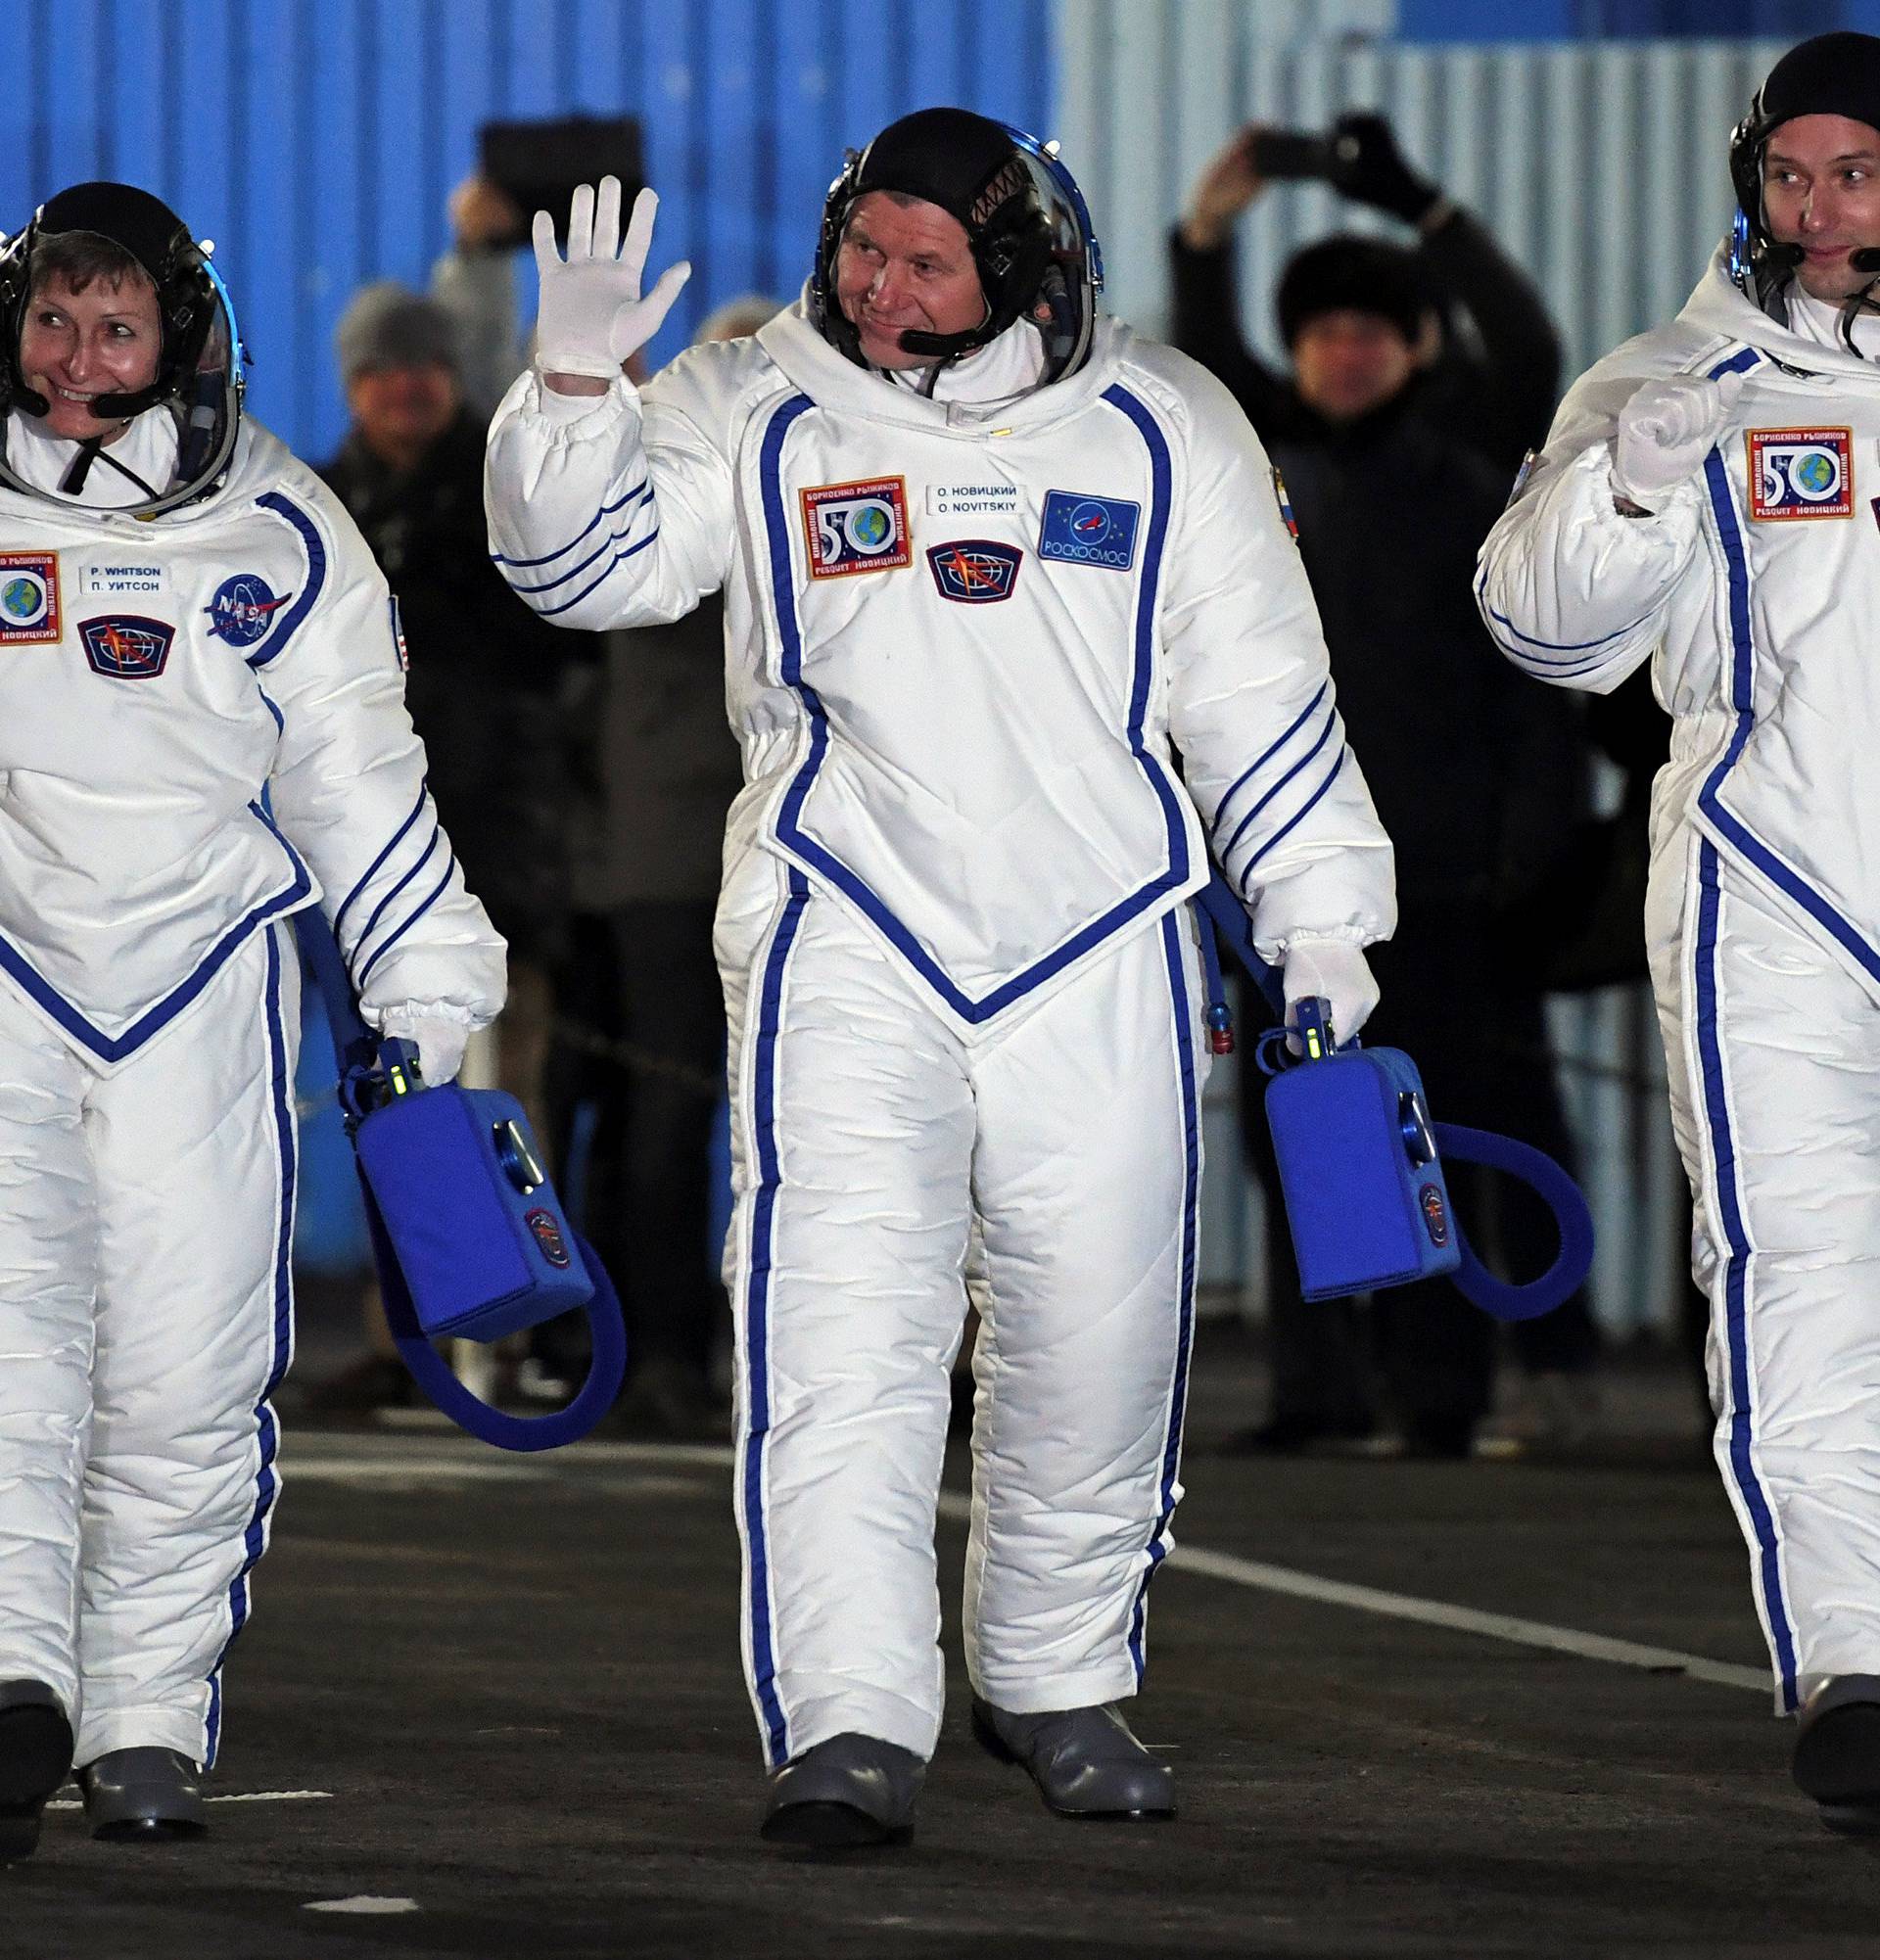 The International Space Station (ISS) crew members Peggy Whitson of the U.S., Oleg Novitskiy of Russia and Thomas Pesquet of France walk to board the Soyuz MS-03 spacecraft for the launch at the Baikonur cosmodrome